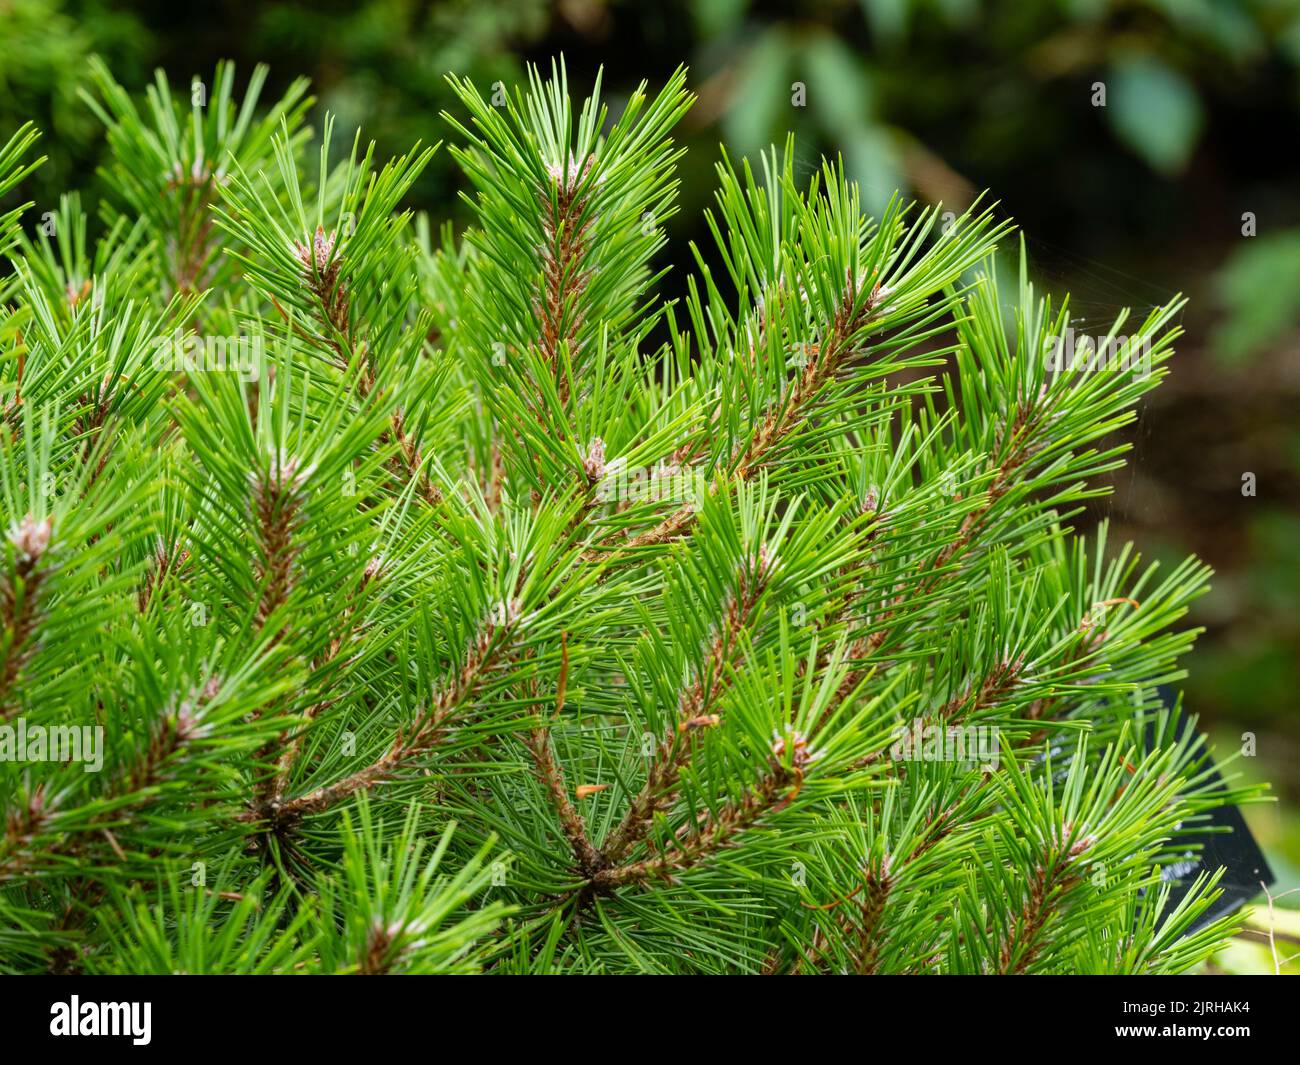 Green needles of the low growing, compact form of the hardy evergreen conifer, Pinus densiflora 'Low Glow', Japanese Red Pine Stock Photo